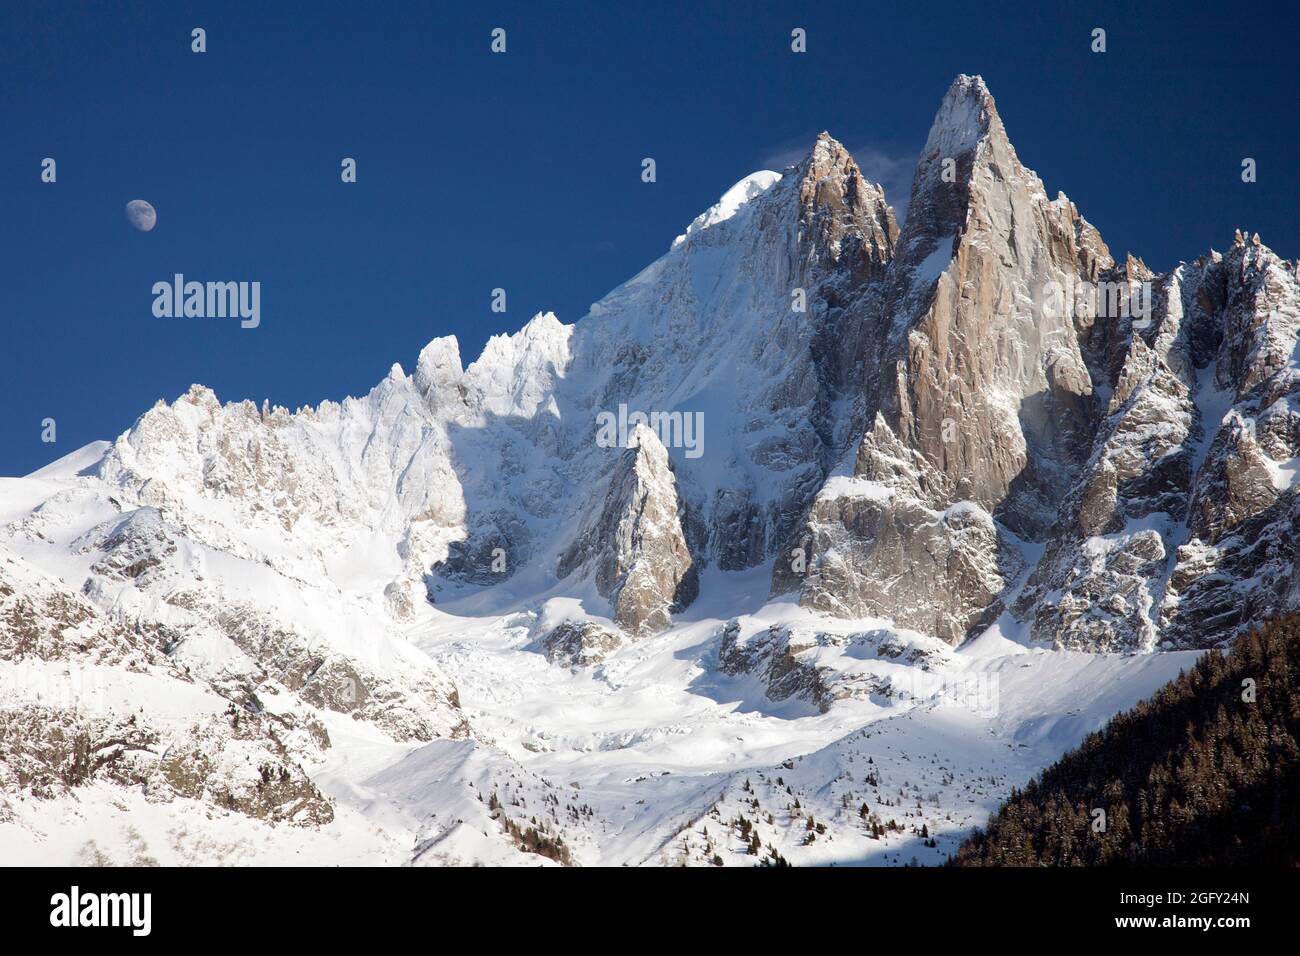 Winter landscape of Aiguille de Dru, Mont Blanc massif, French Alps, France. One of the six great north faces of the Alps. Stock Photo